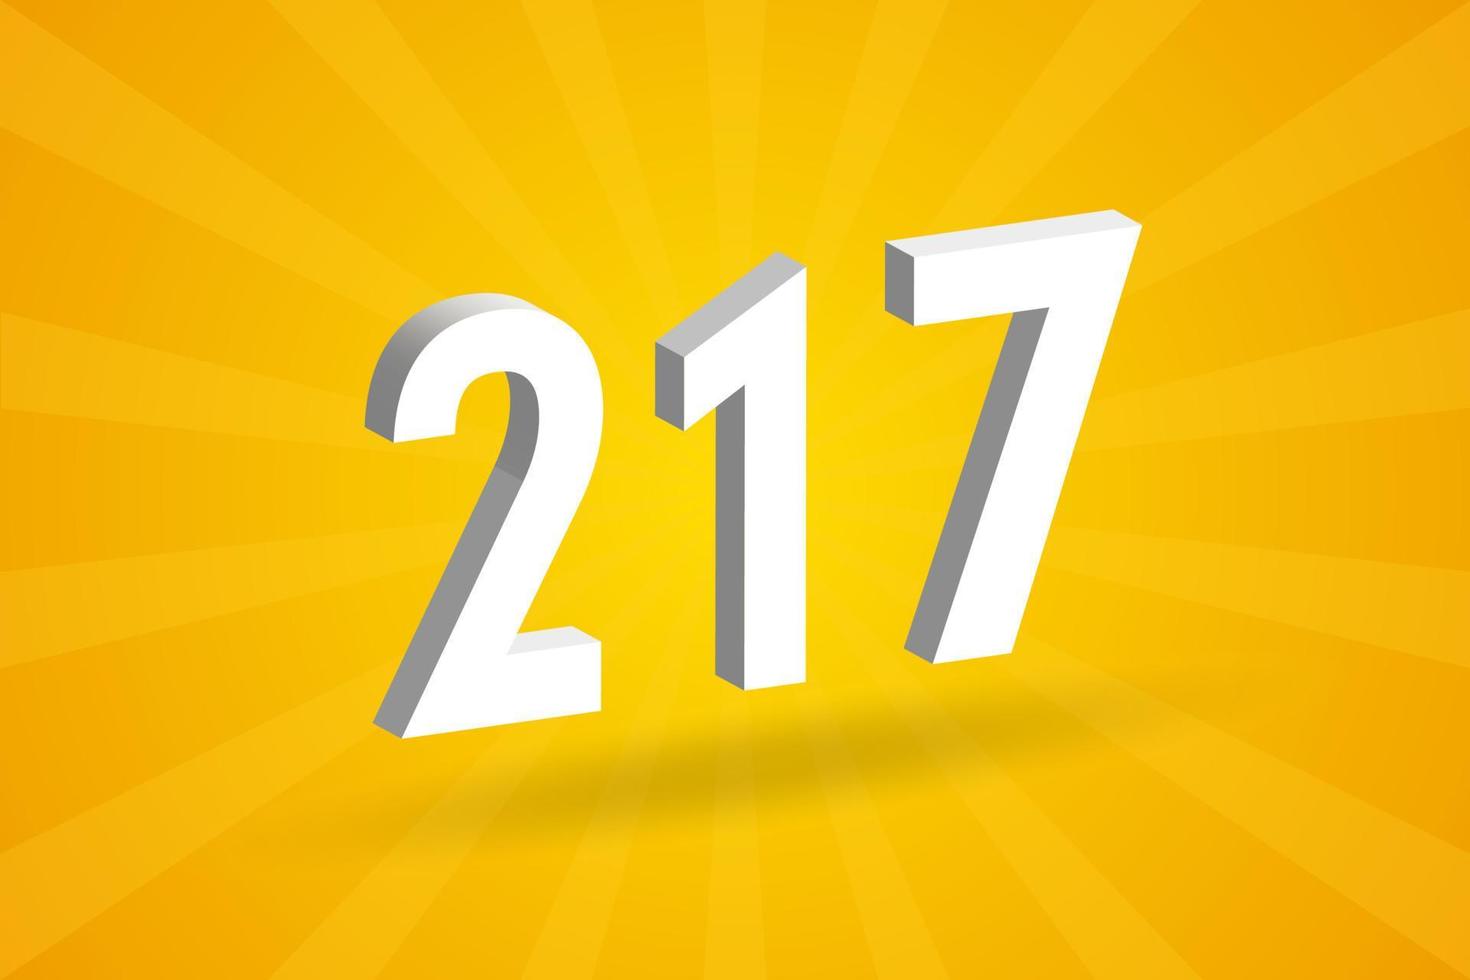 3D 217 number font alphabet. White 3D Number 217 with yellow background vector